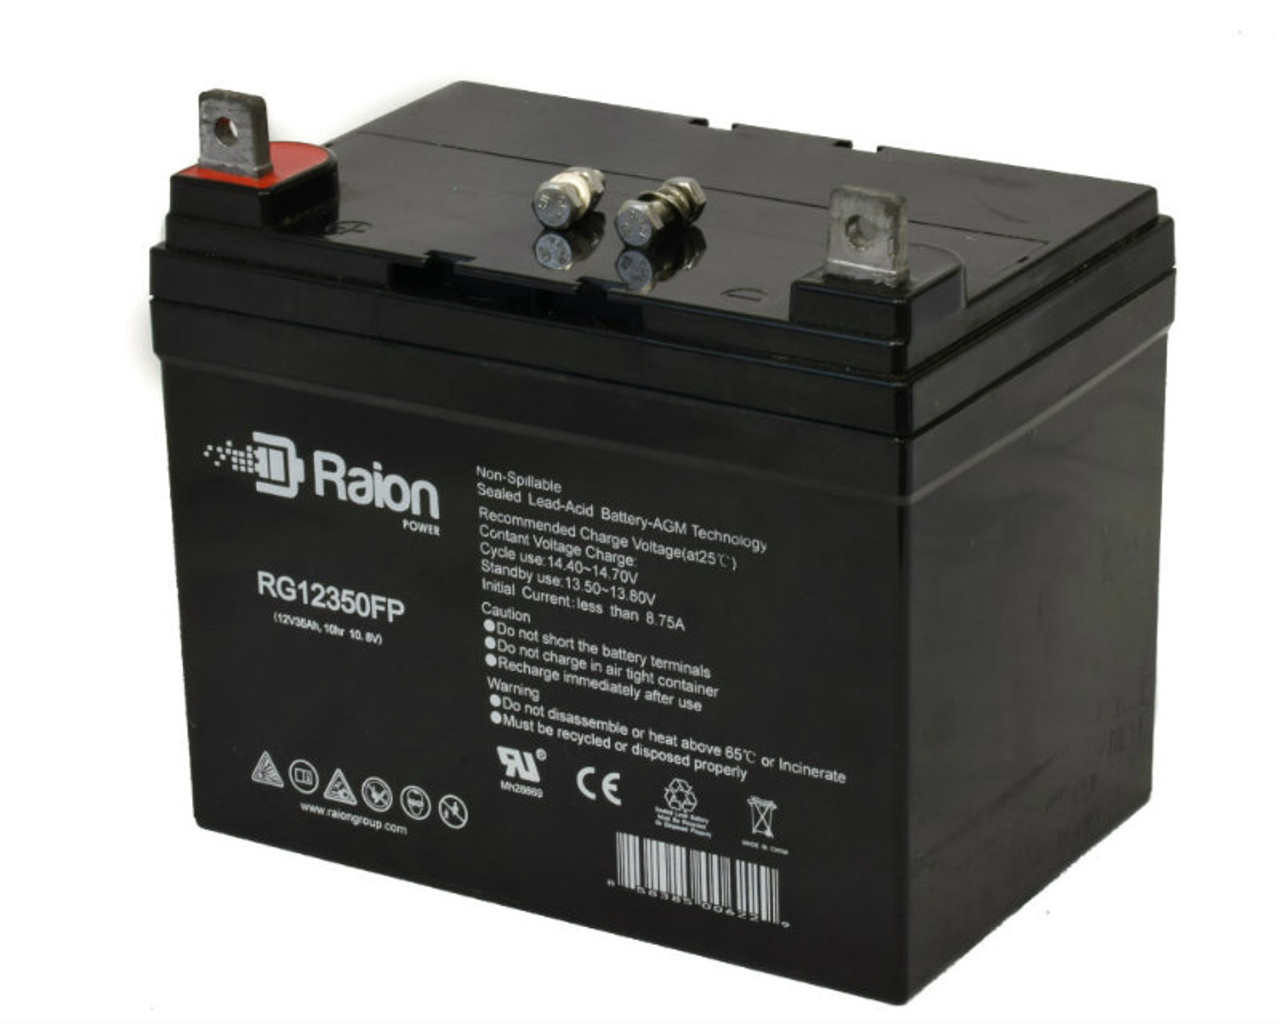 Raion Power Replacement 12V 35Ah RG12350FP Battery for Bosfa GB12-33